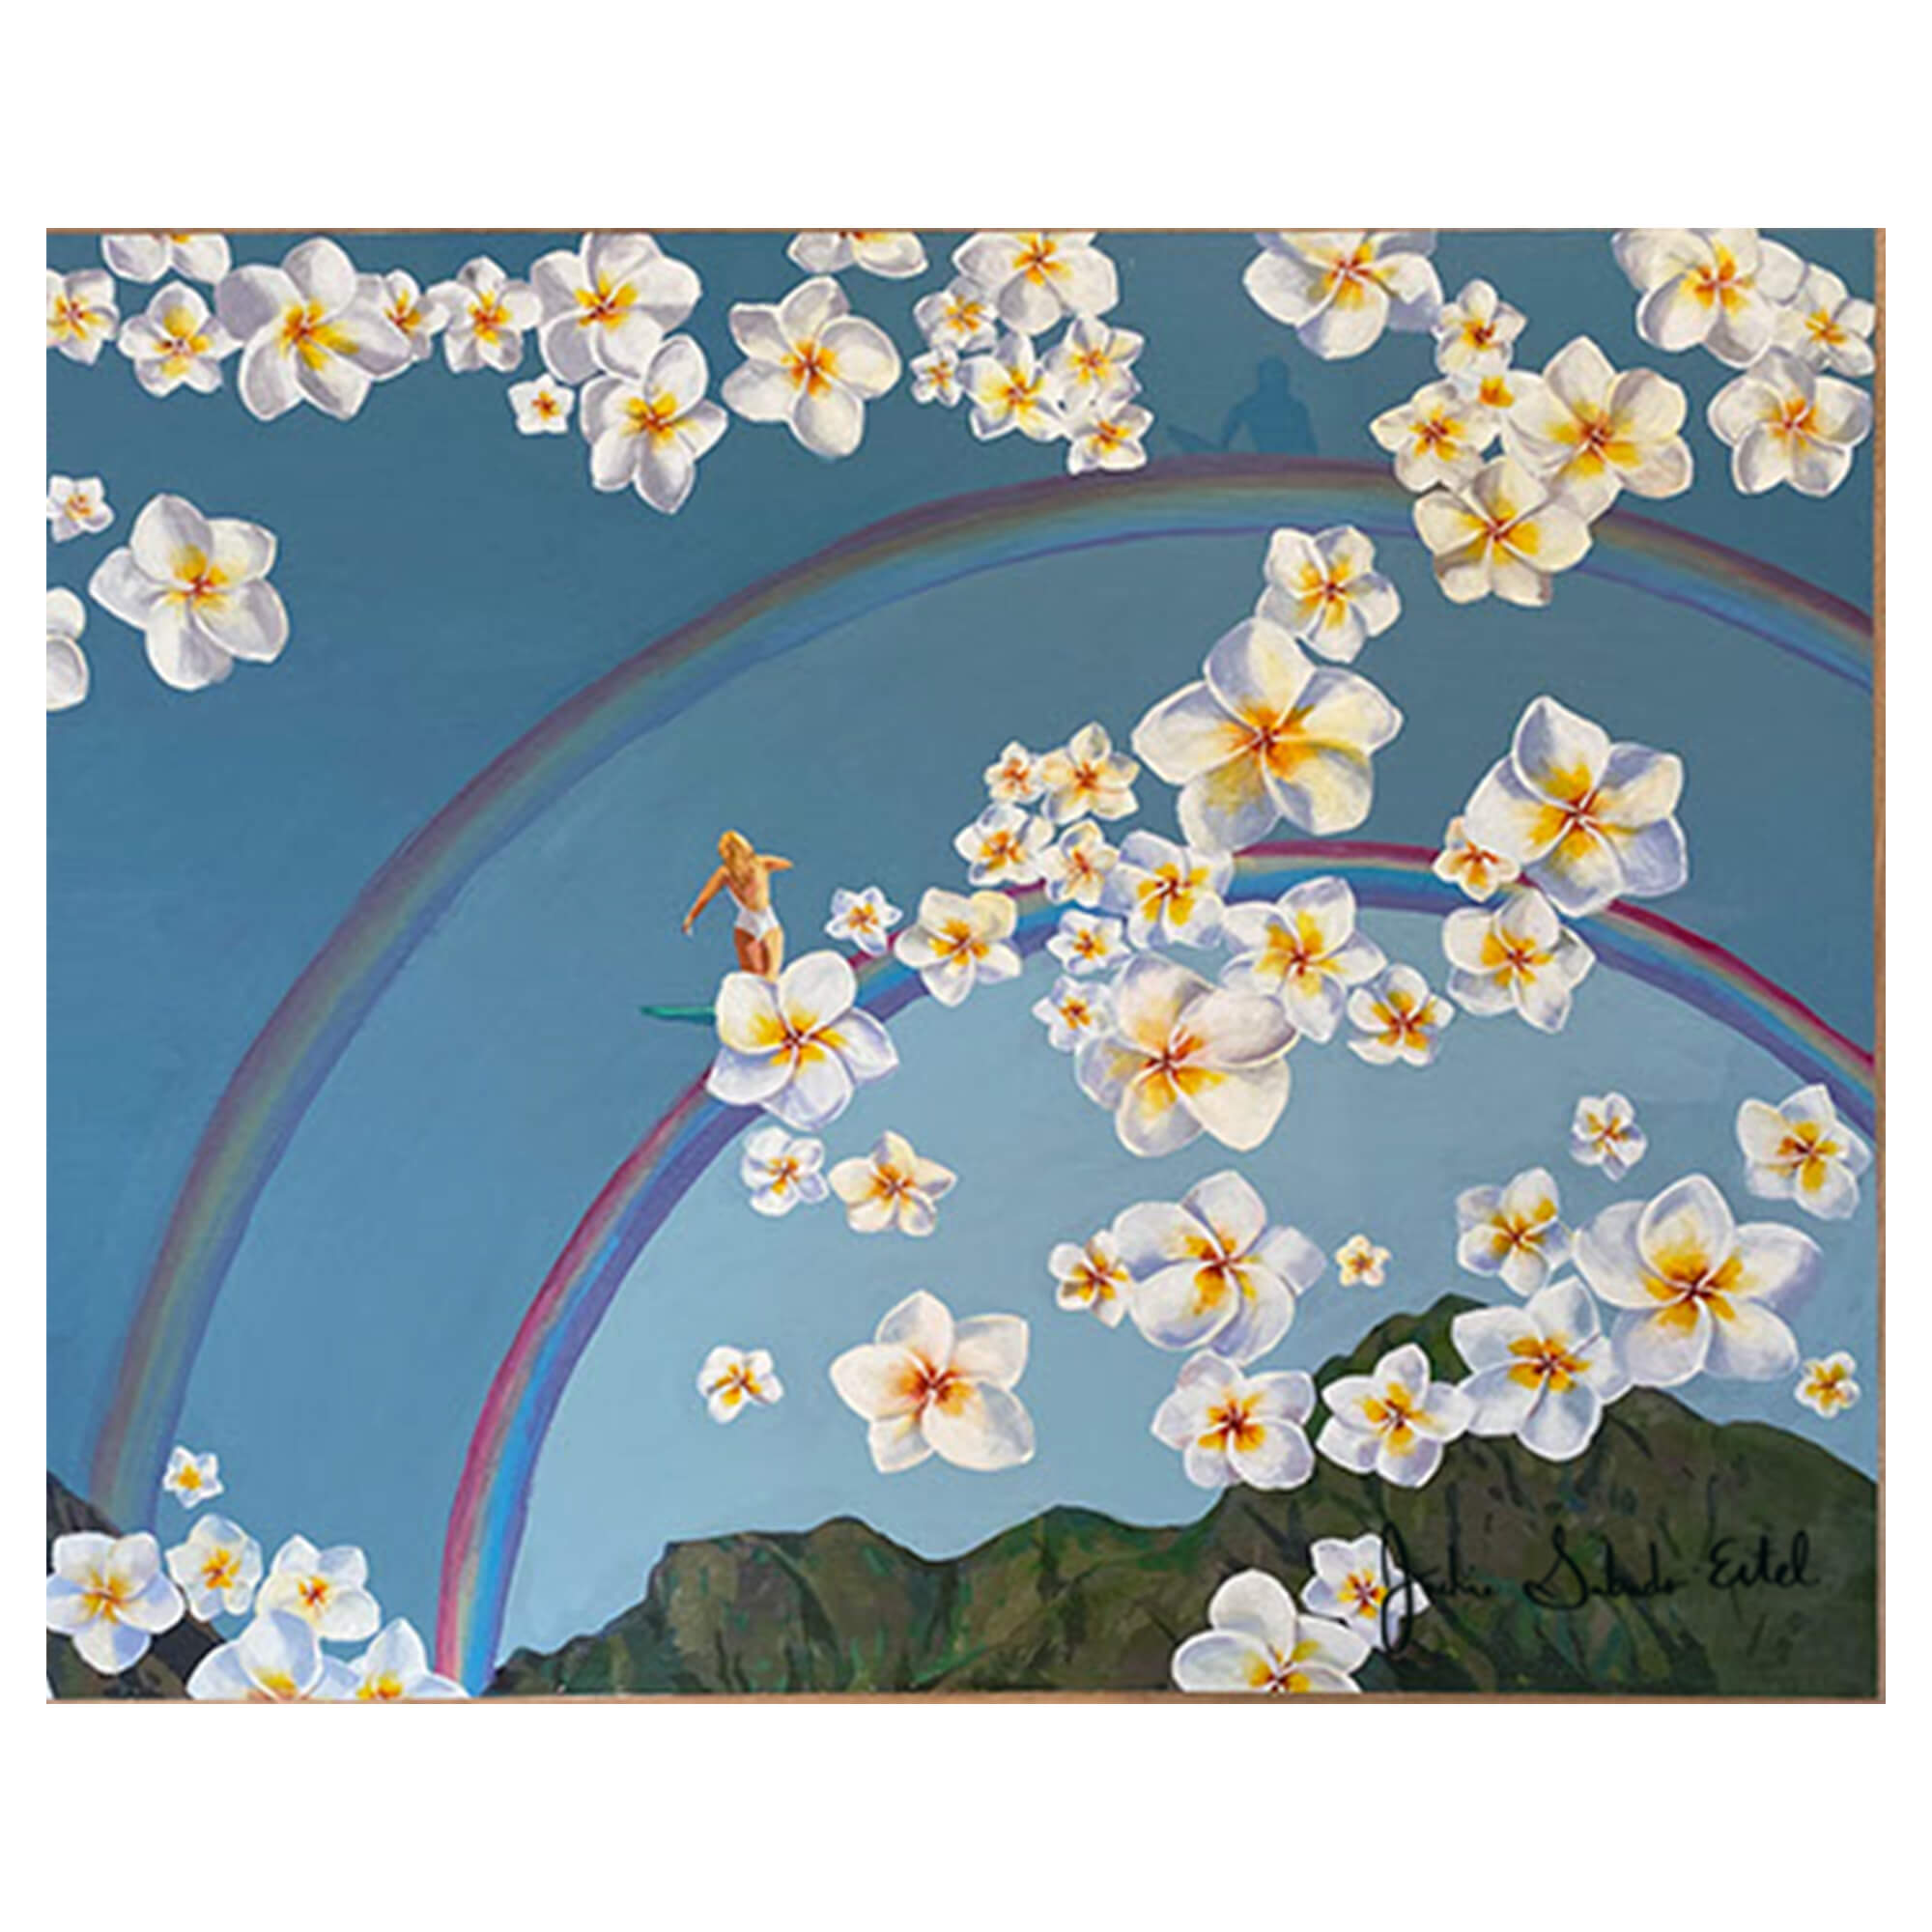 A matted art print featuring a woman surfing on a rainbow above the mountains of Hawaii framed by plumeria flowers by Hawaii artist Jackie Eitel